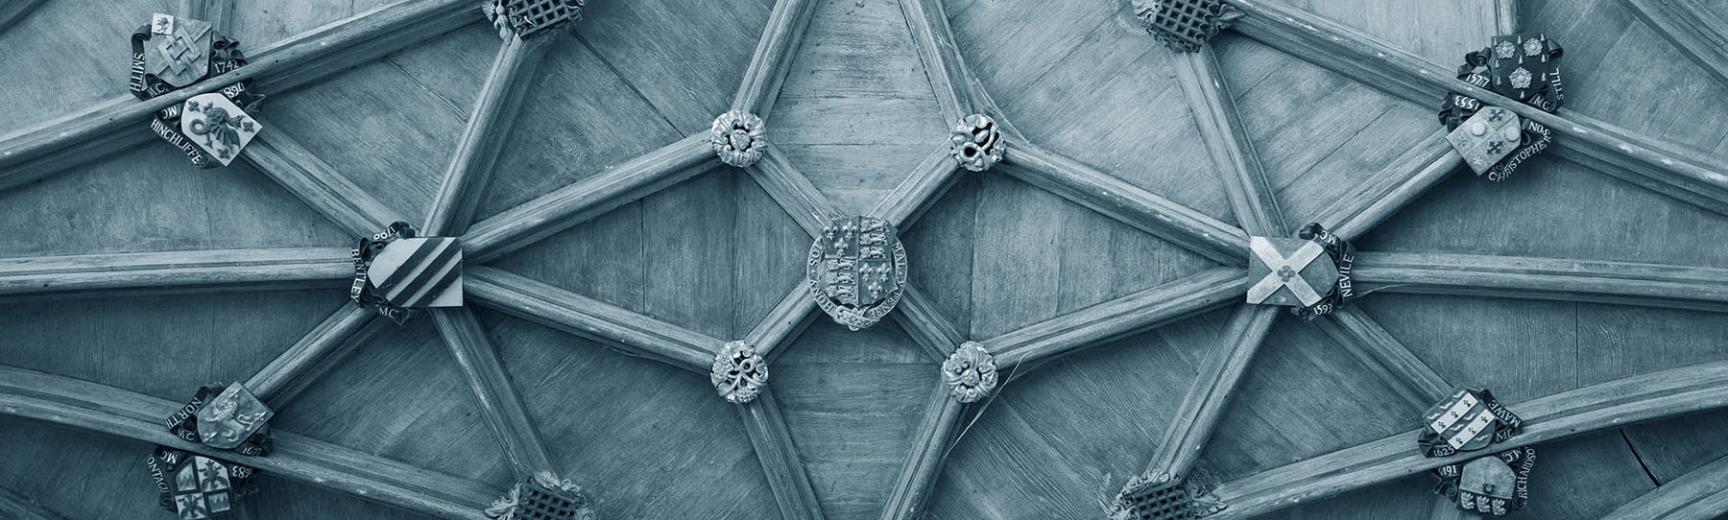 Oxford University crests on the ceiling